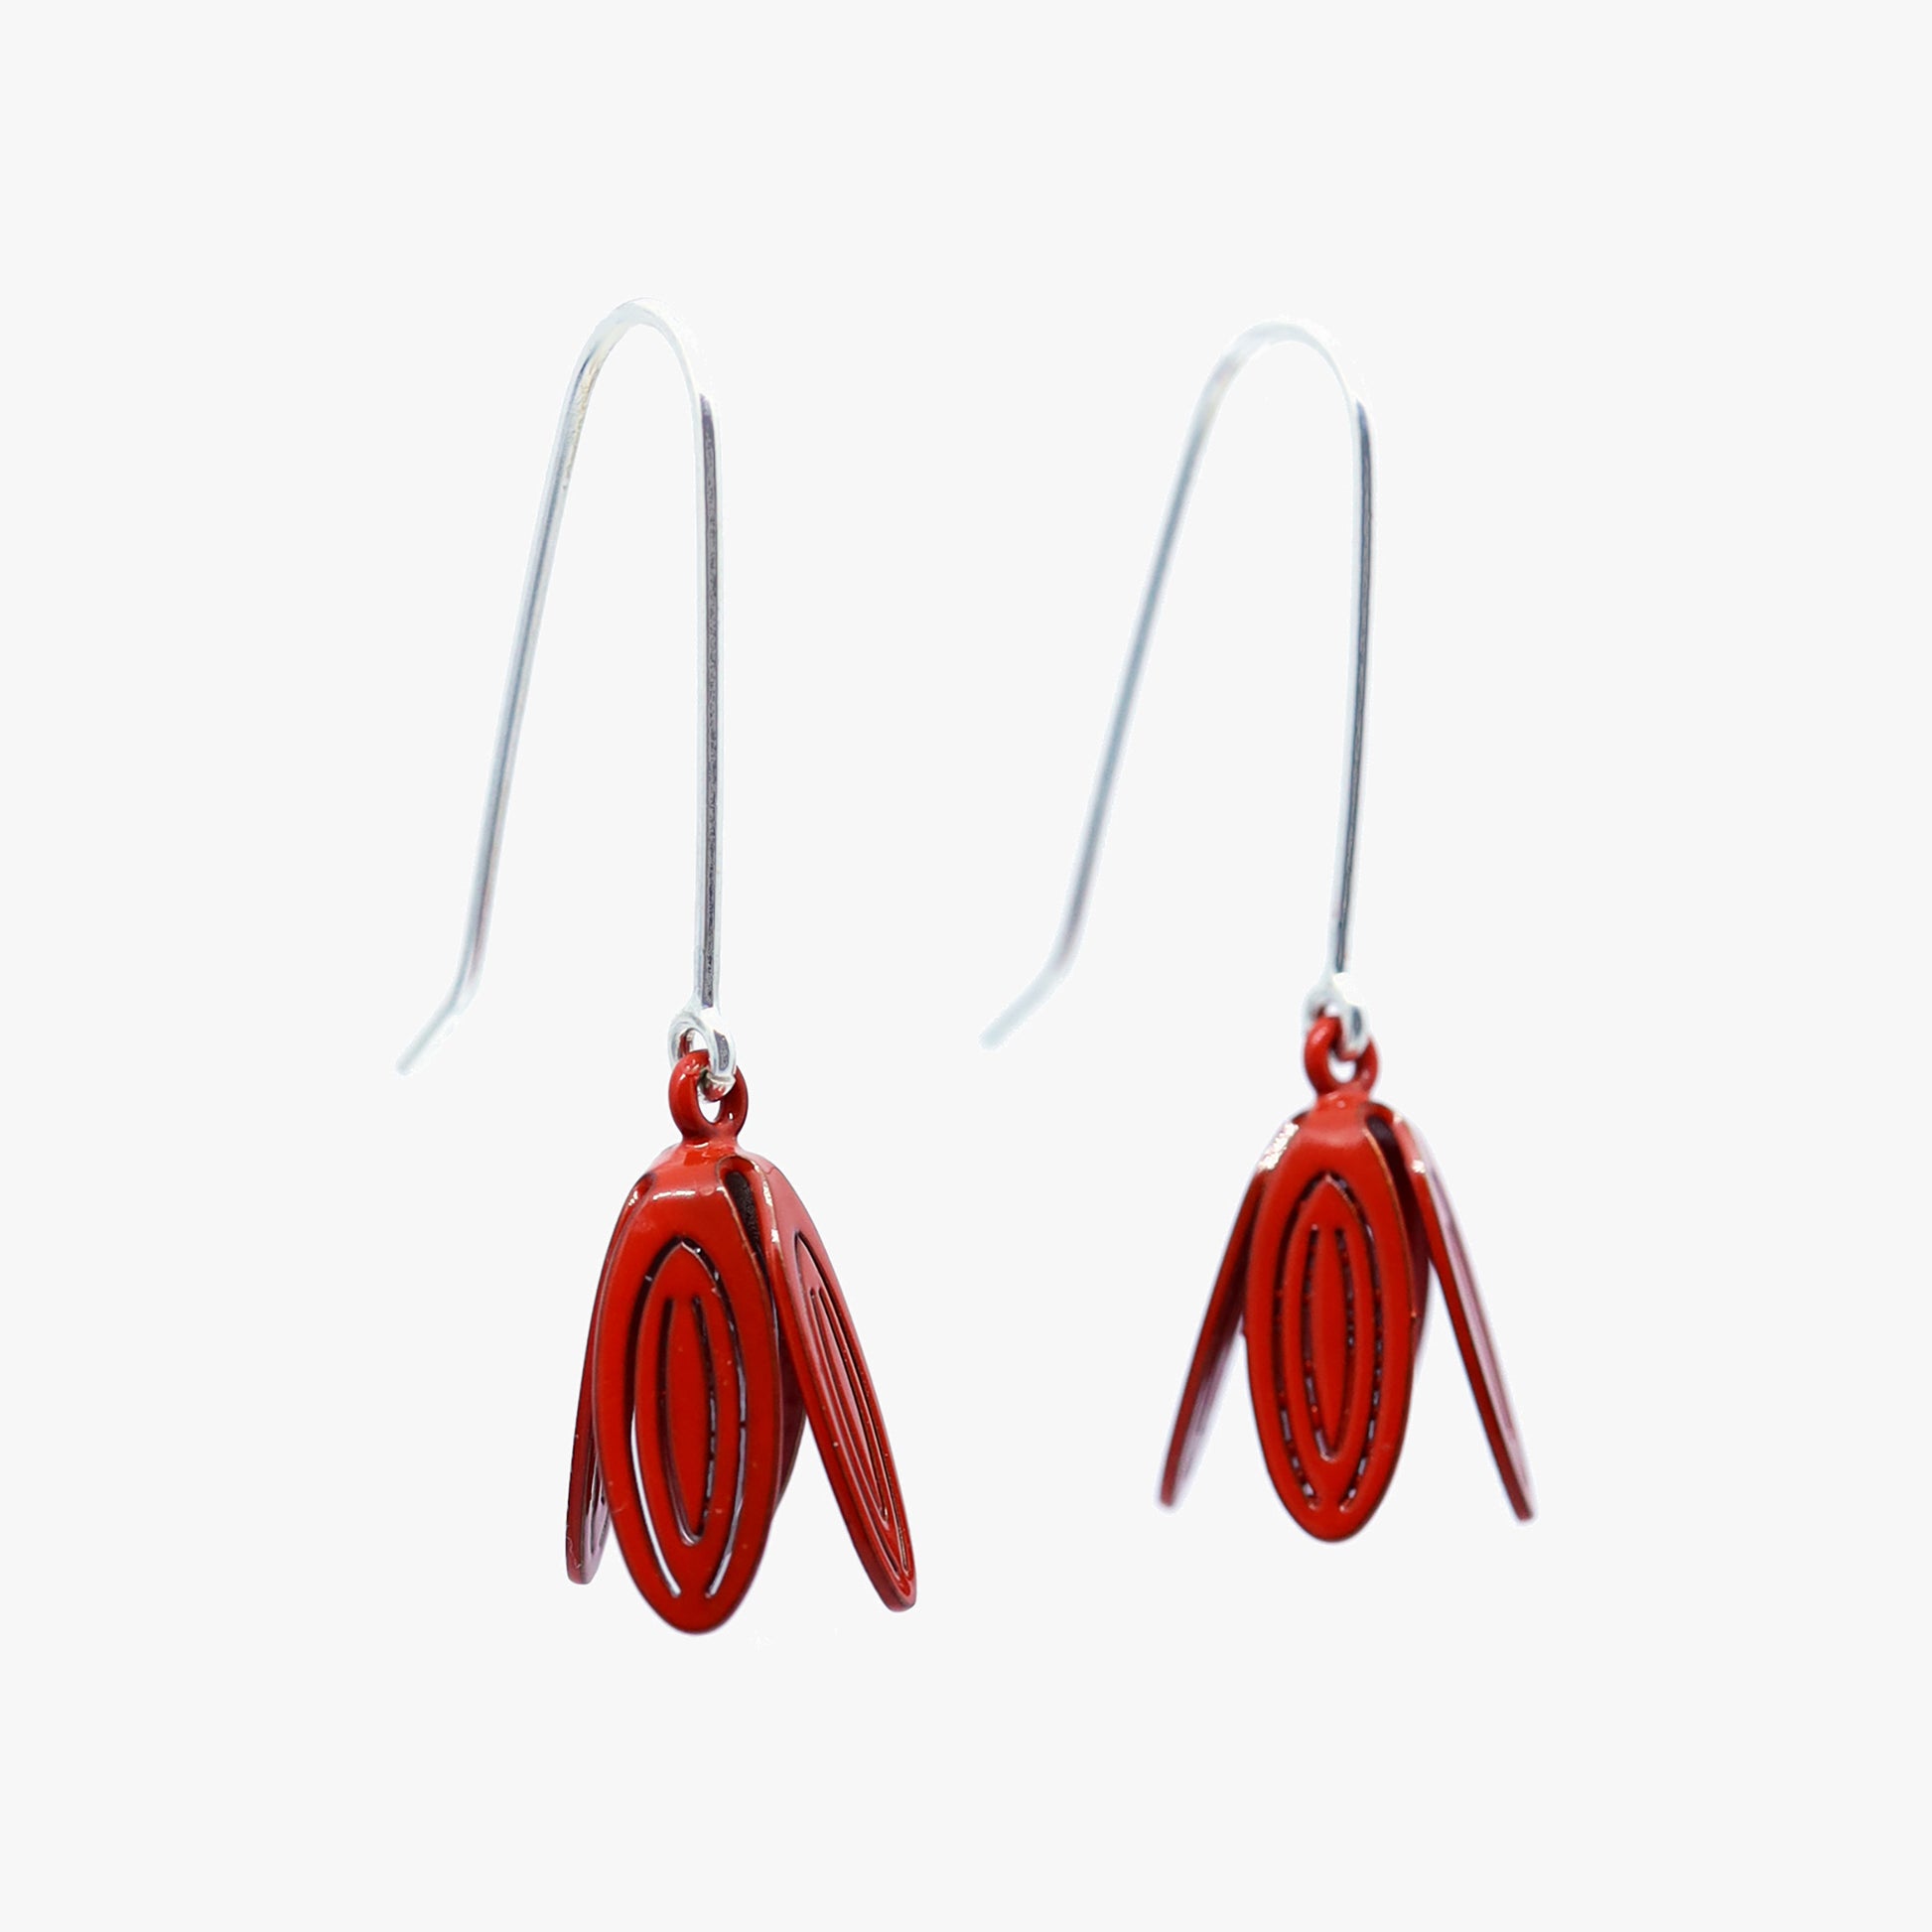 Stunning Petal Drop Earrings by Sorrel Van Allen. Recycled sterling silver and powder-coated brass construction. Intricate laser-cut petals hand-folded for elegant movement. Versatile accessory for casual or formal wear. 